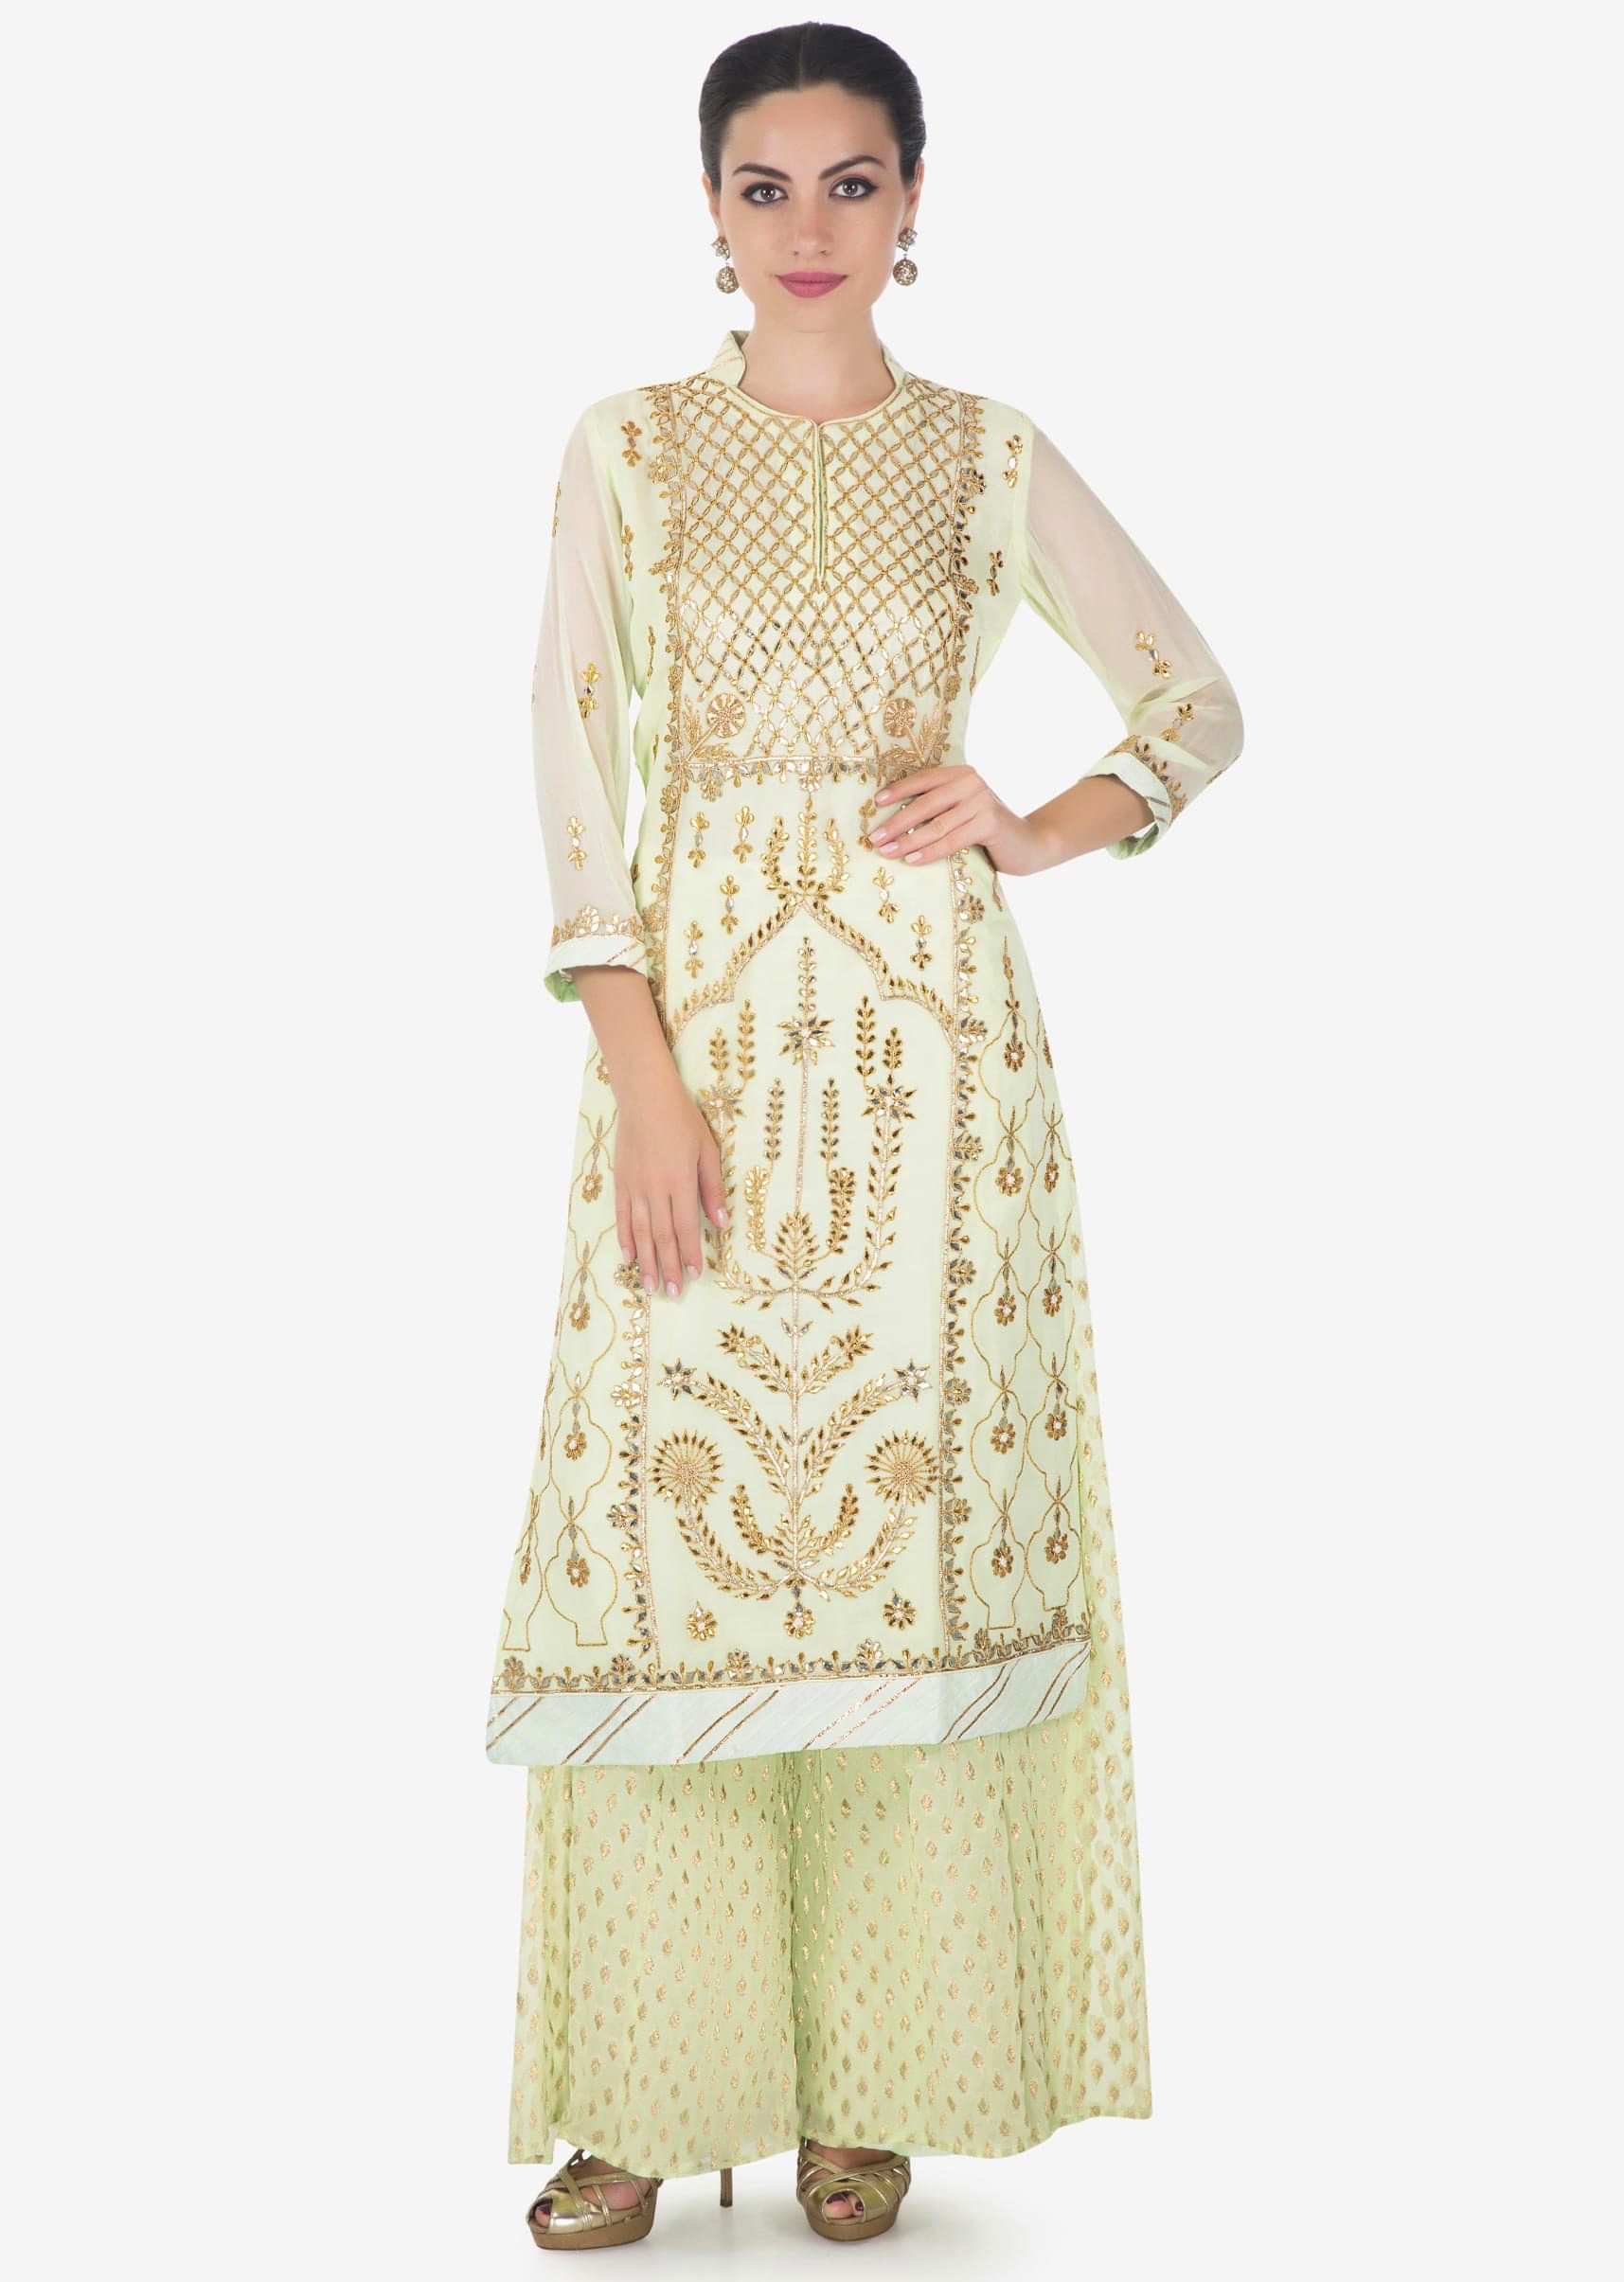 Lime Green Straight Palazzo Suit In Georgette Adorn In Gotta Patch, Zari And Moti Work Online - Kalki Fashion